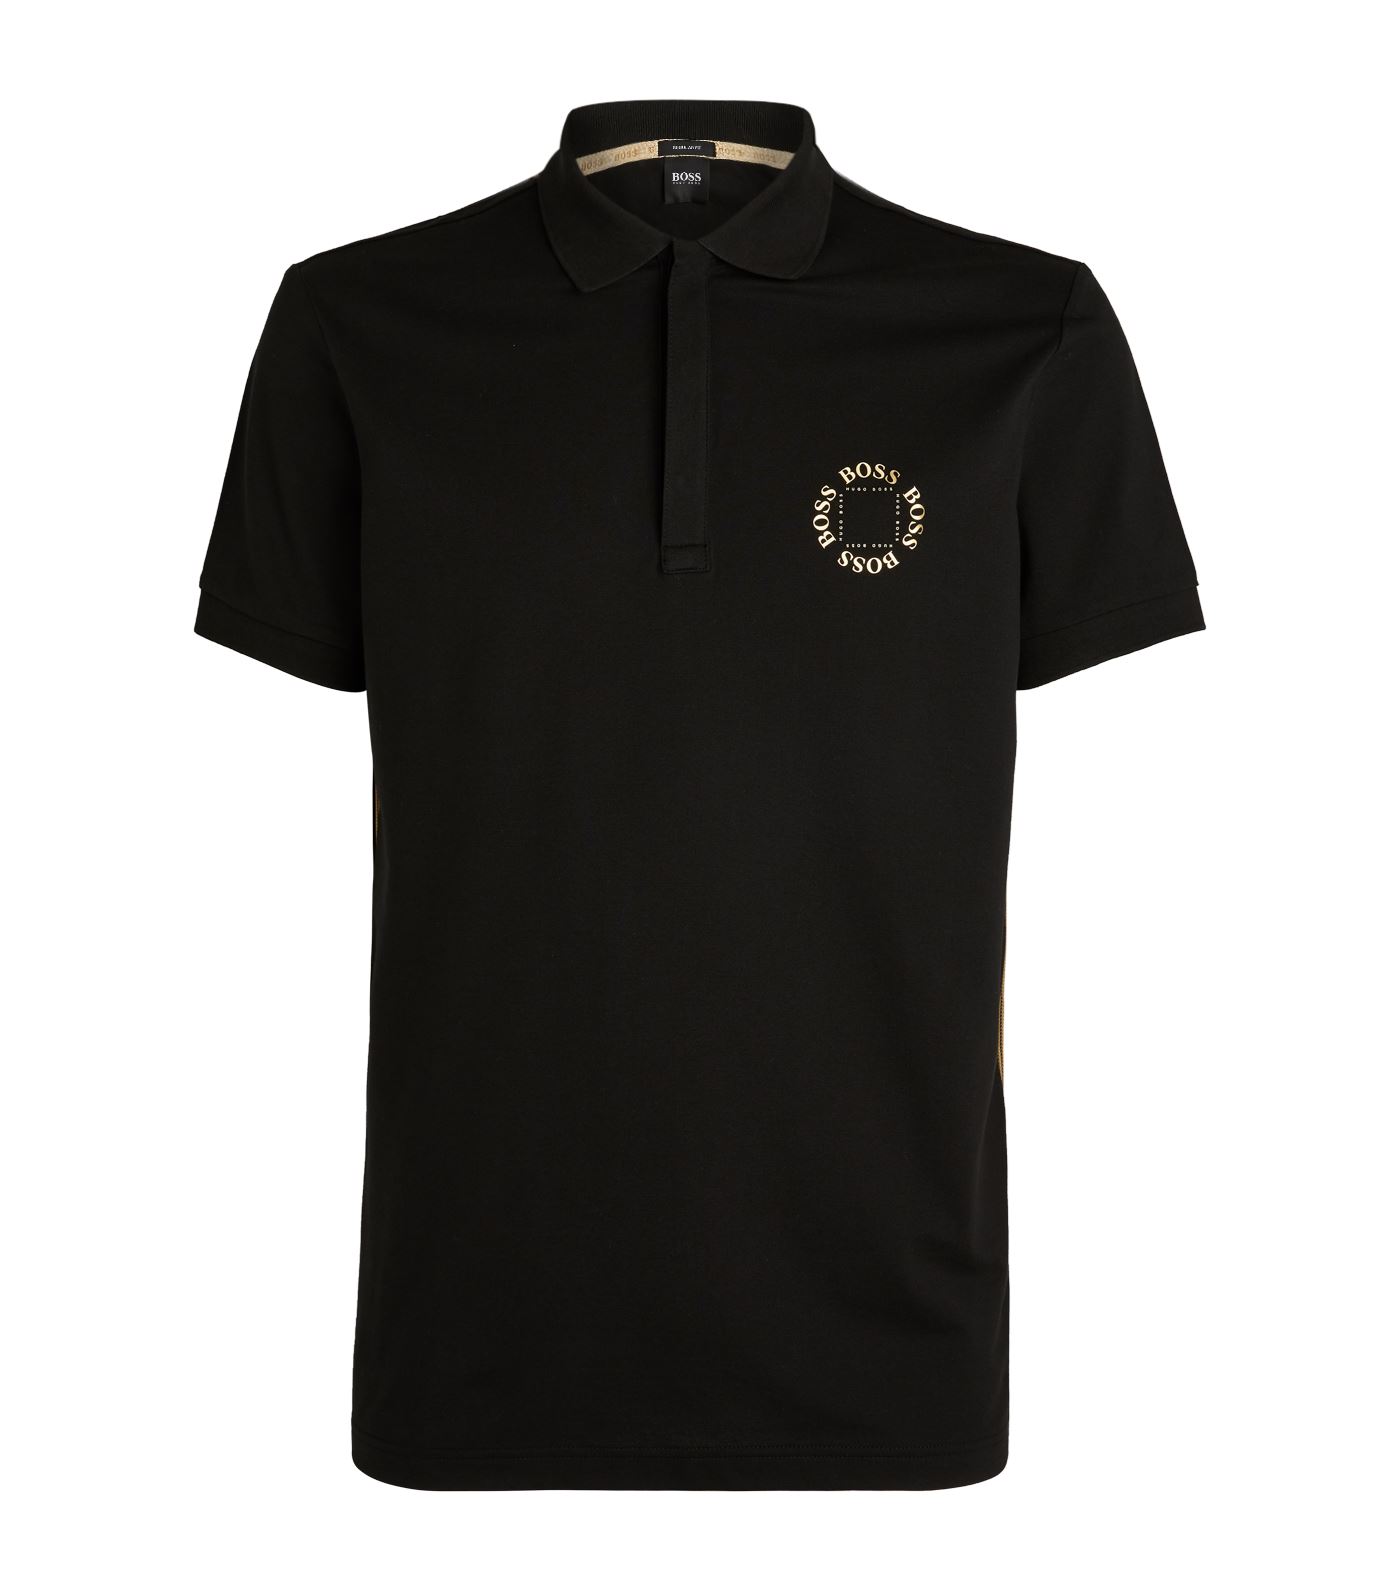 BOSS - A mainstay in any man's wardrobe, this BOSS polo shirt is crafted from piqué cotton for a tex